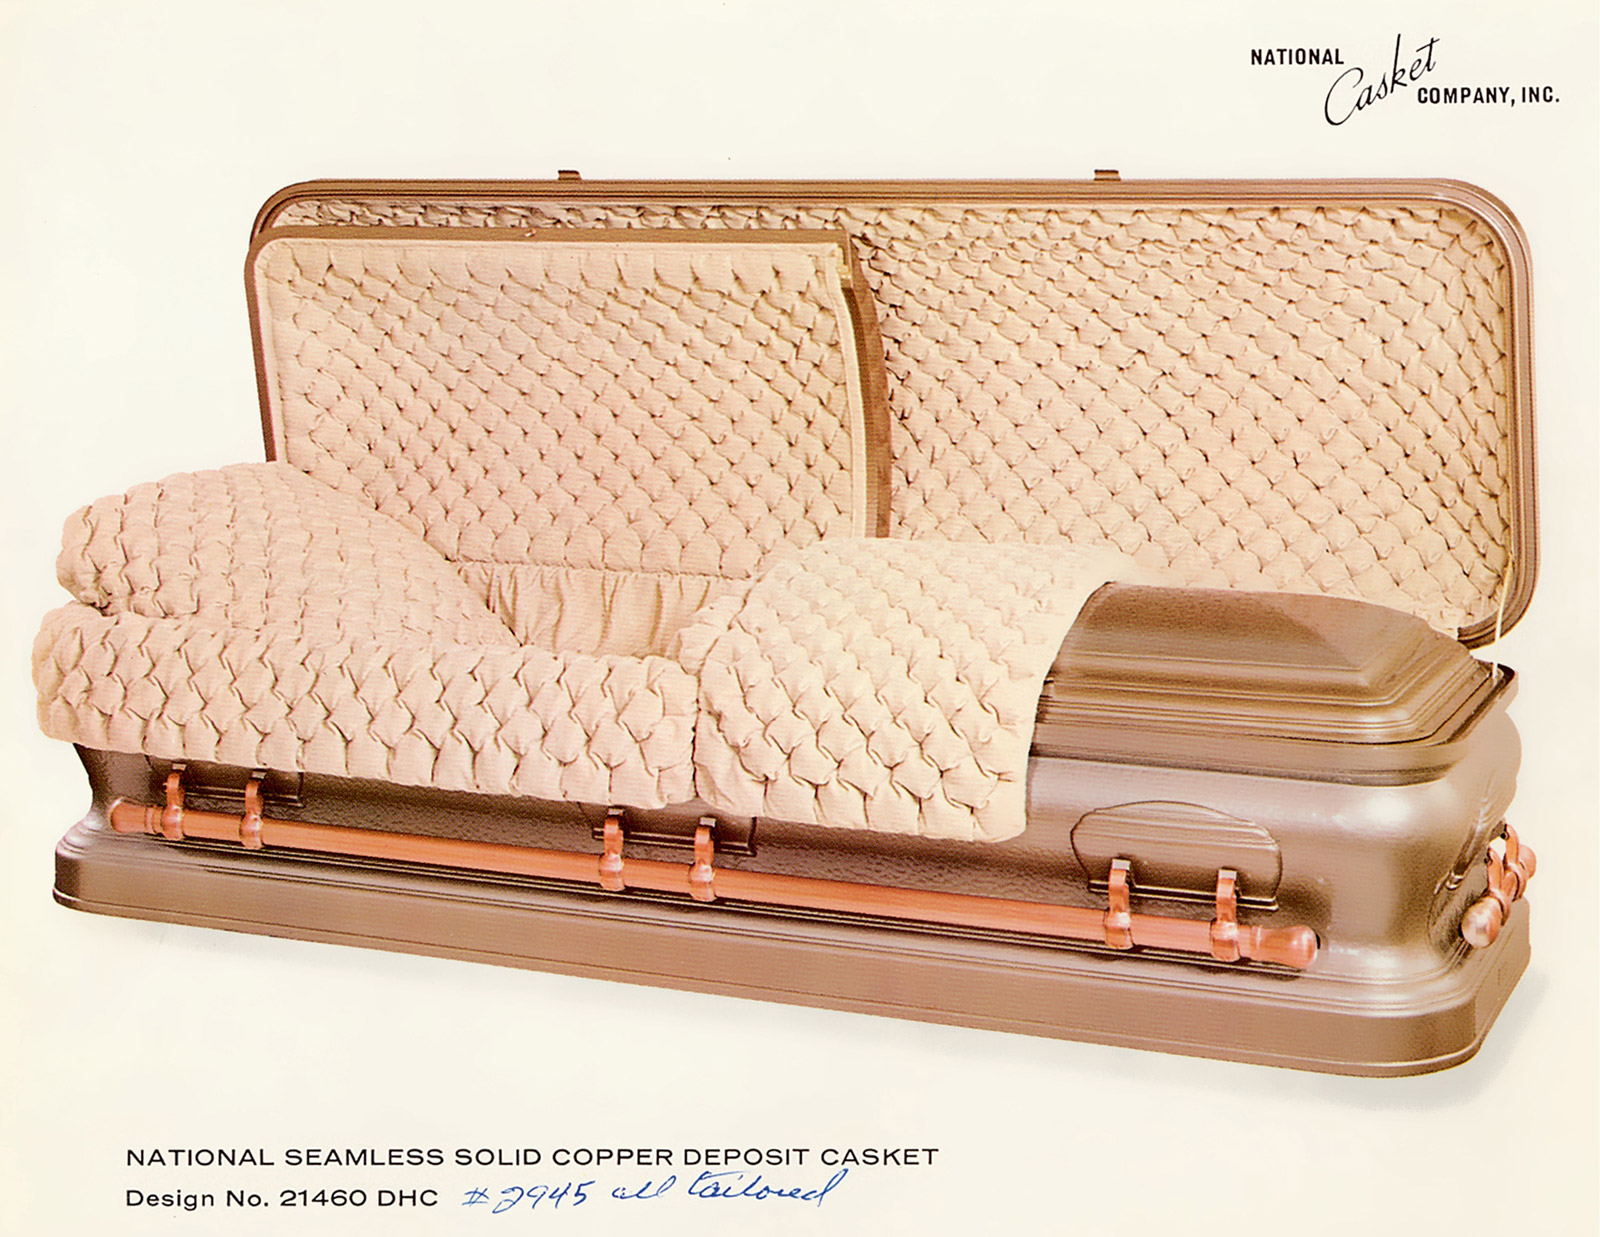 Not a casket to be ashamed of. Courtesy Jon Austin, Museum of Funeral Customs.